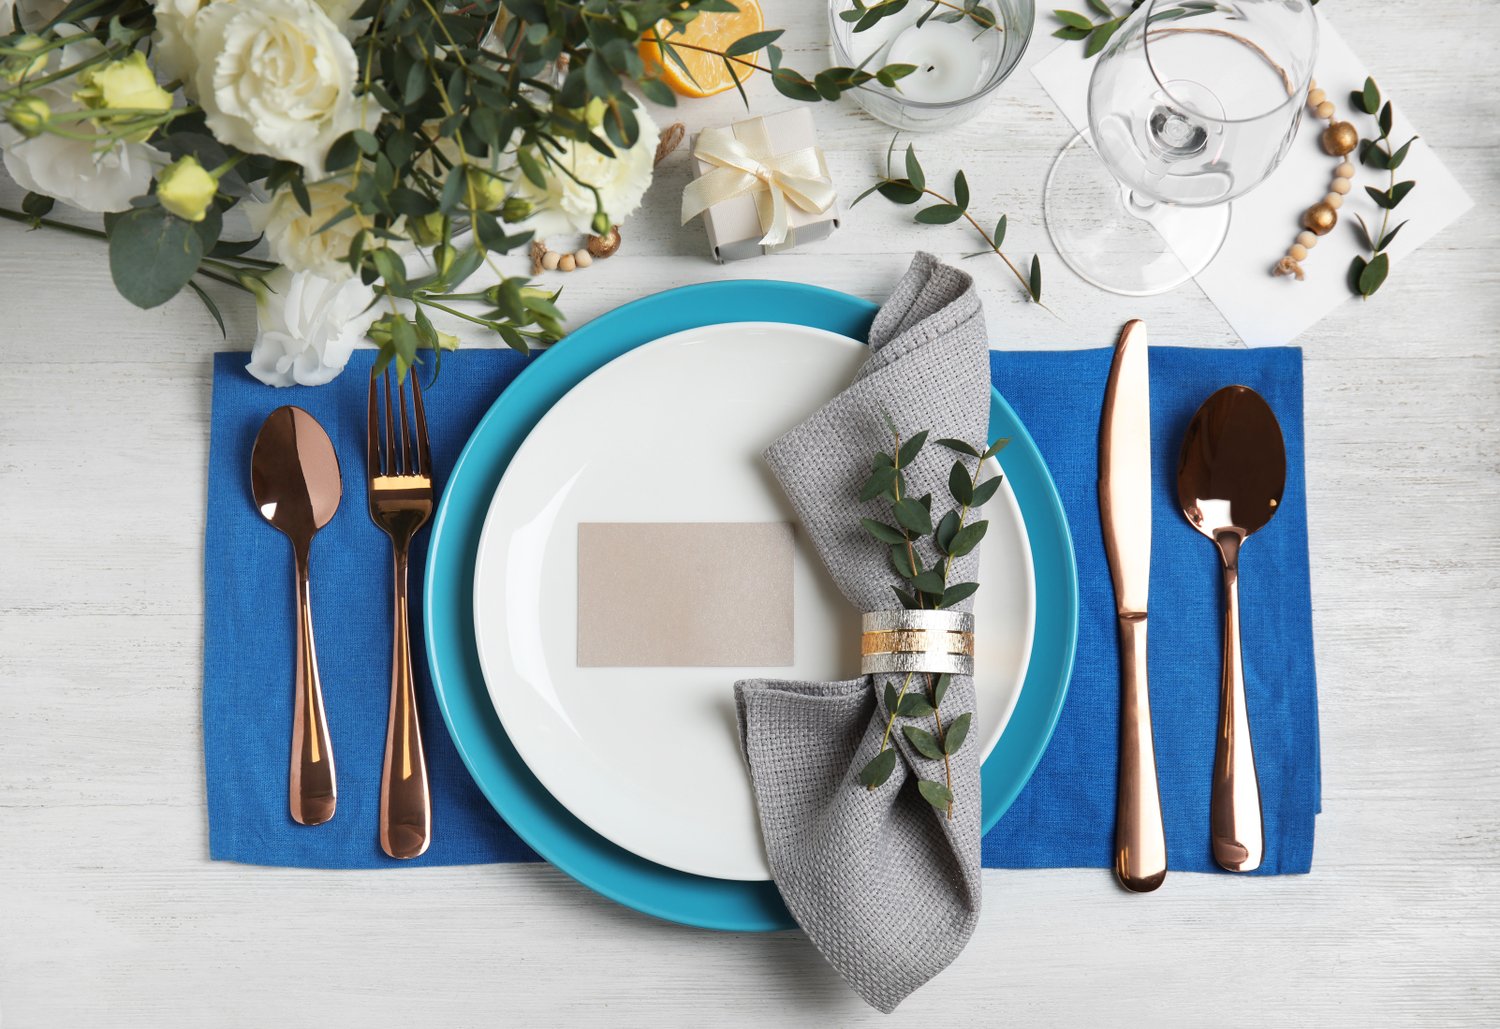 How to choose the best tableware: 5 tips